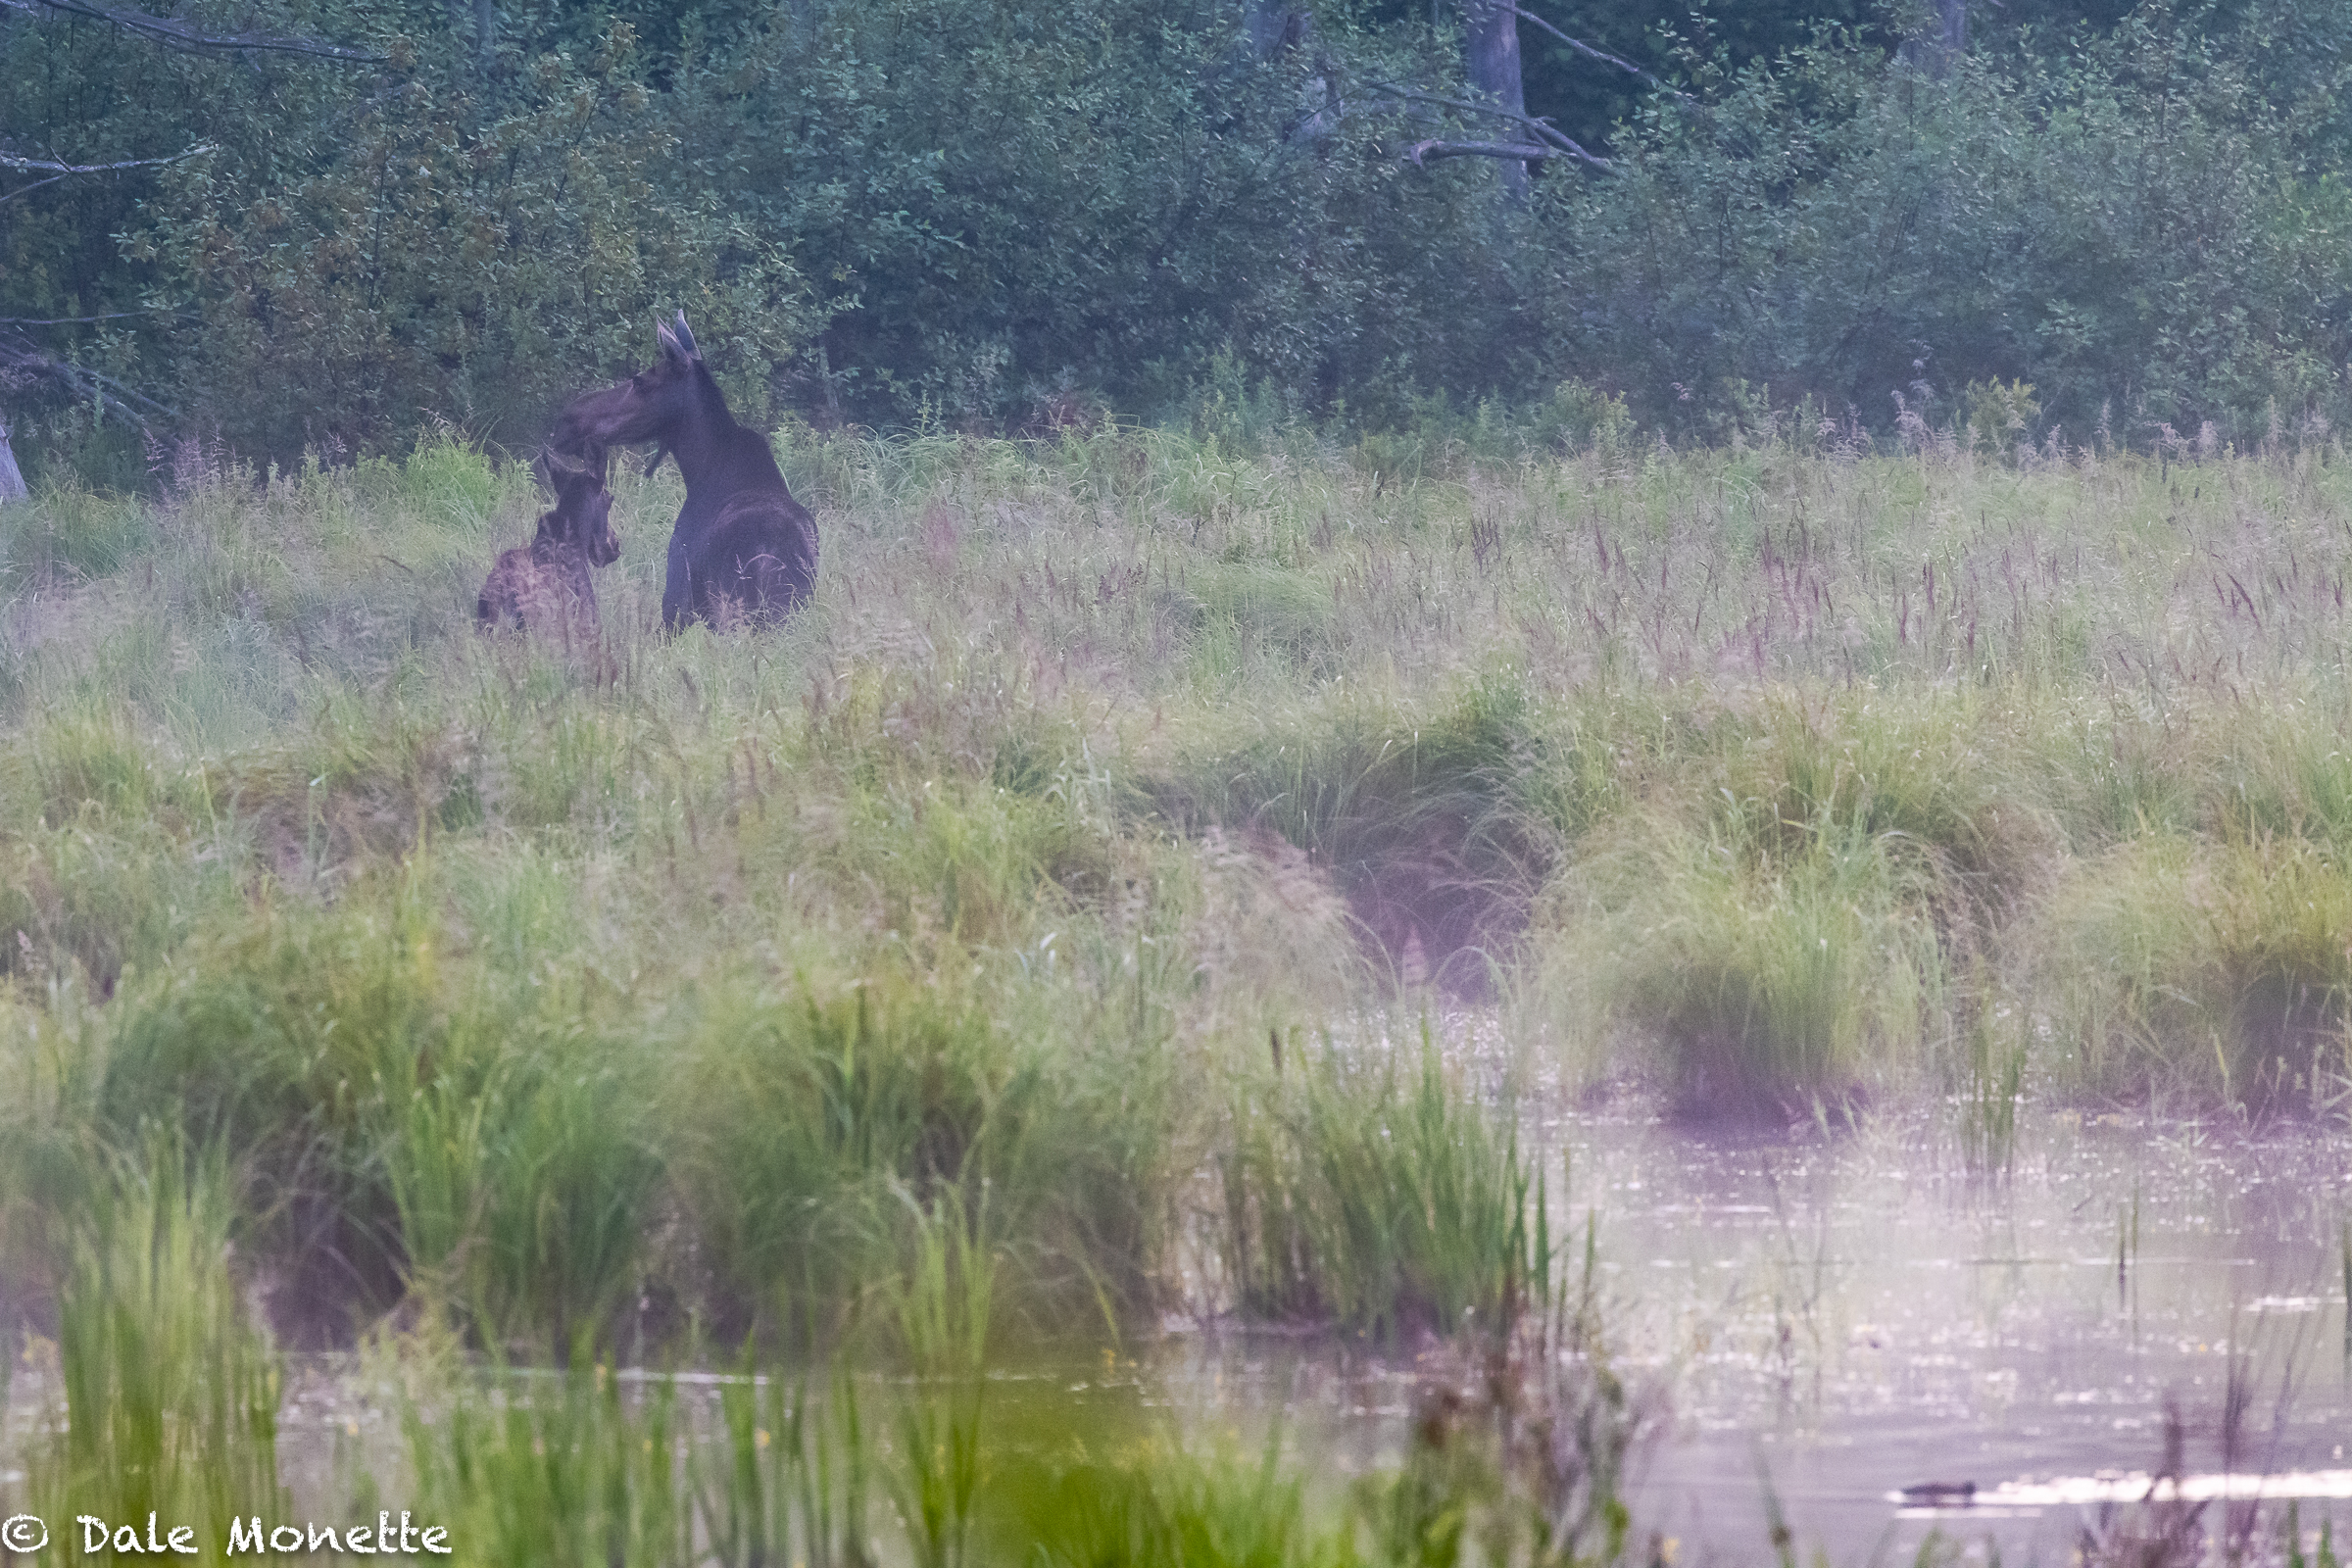   I found these 2 moose in a swamp this morning while it was still quite dark. A mother and it looks like moose from last year still with her. Can you spot the beaver ?  